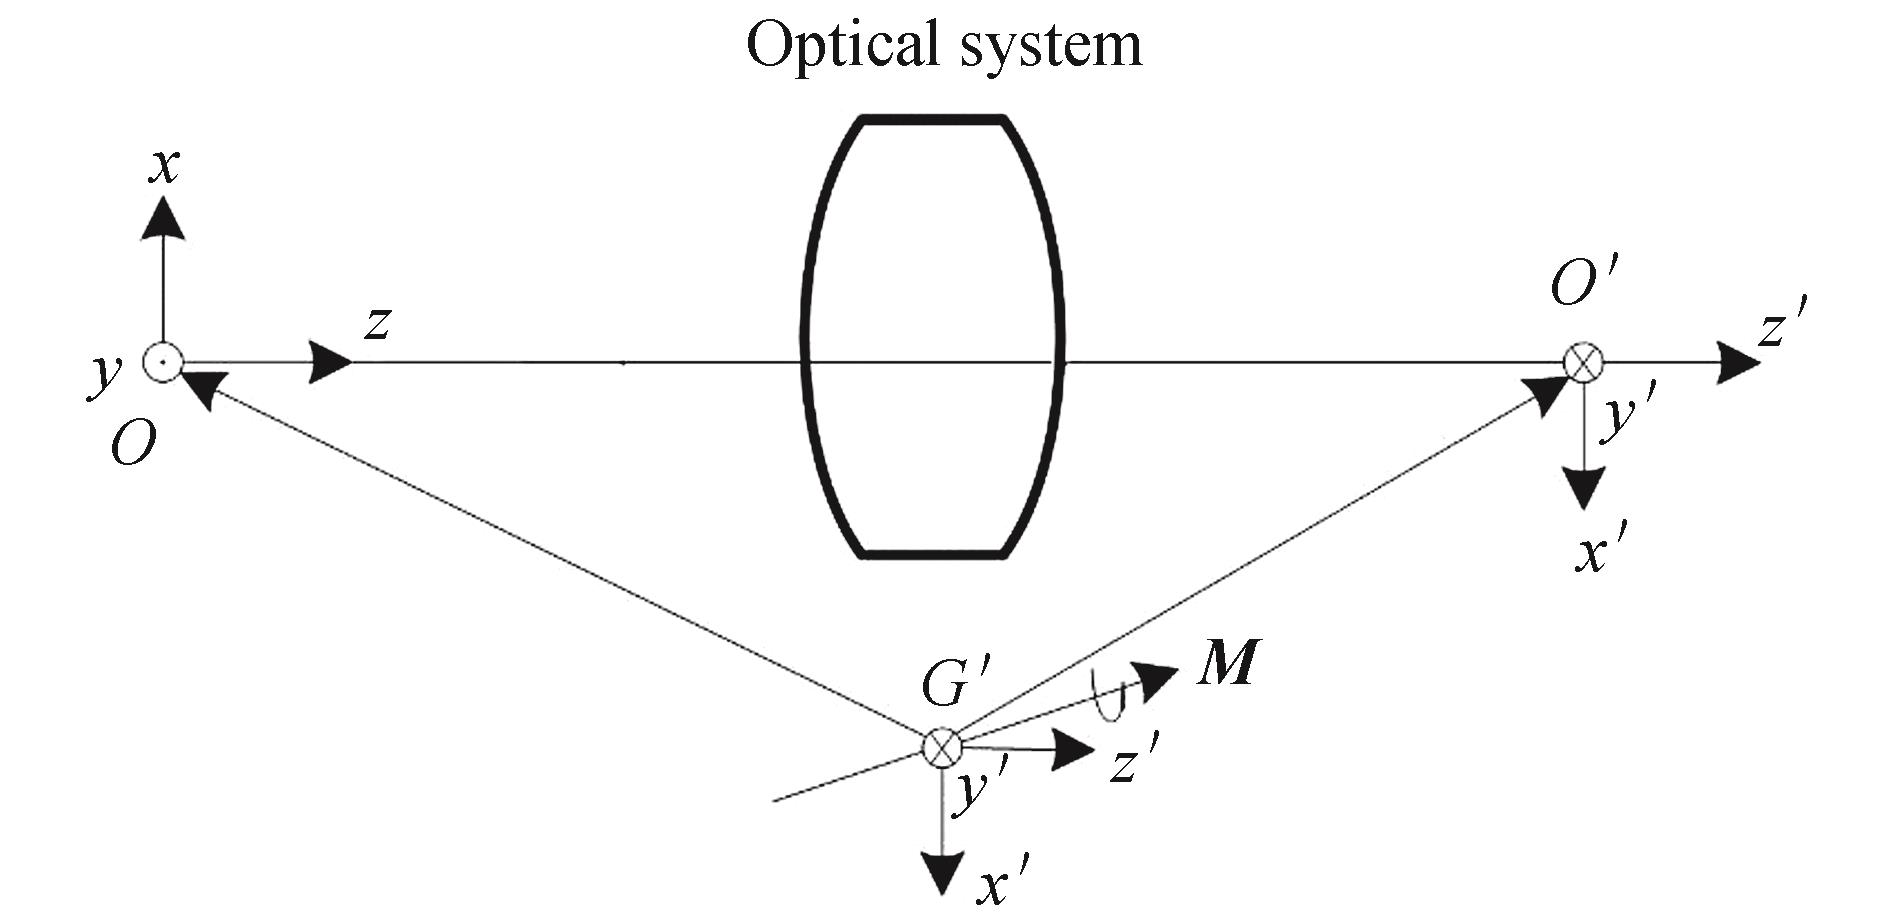 Object and image coordinate systems